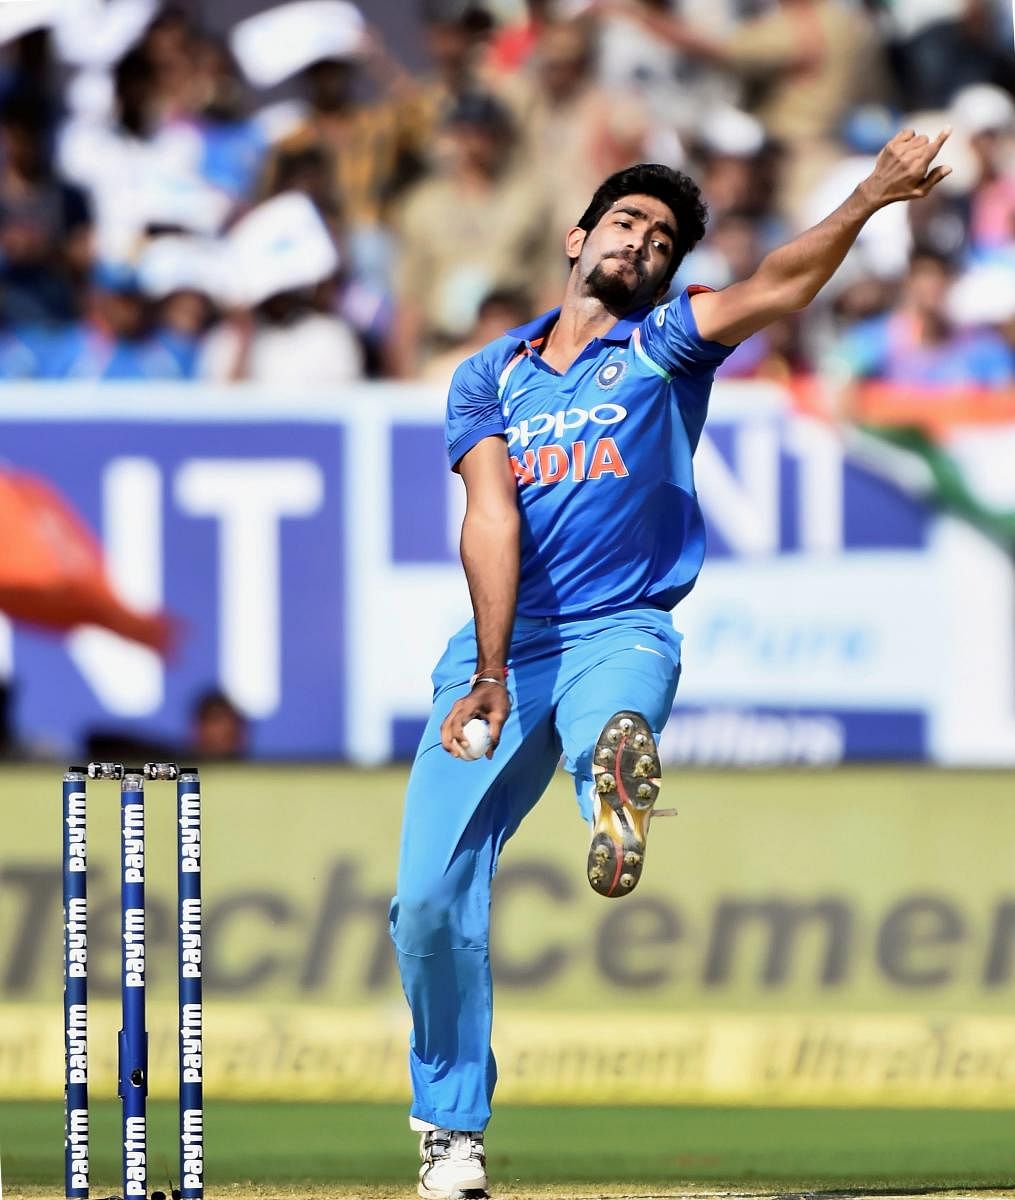 Indian player Jasprit Bumrah in action during the 3rd and final ODI cricket match against Sri Lanka in Vizag is seen in a dated file photo. PTI file photo.